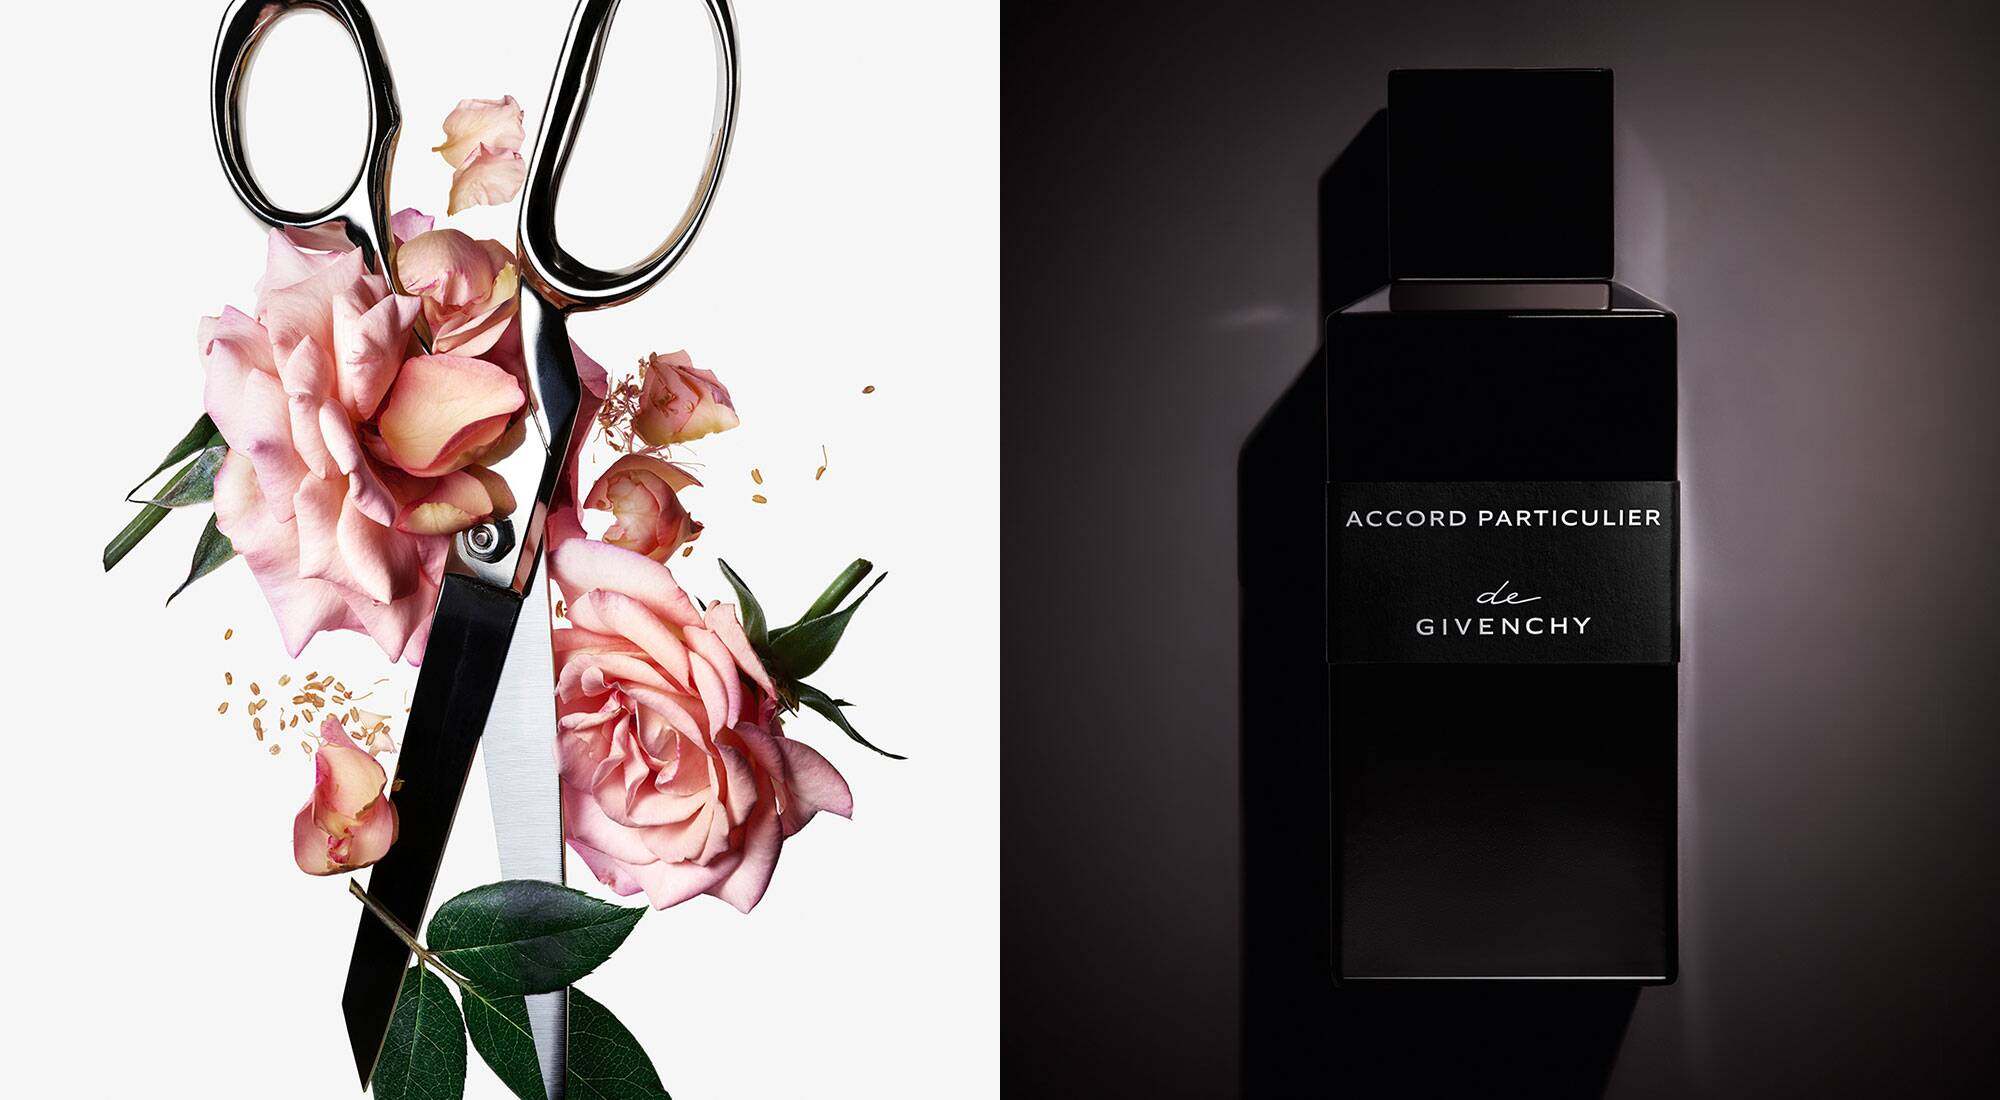 LVMH Fragrance Brands on LinkedIn: #givenchybeauty #fragrance  #lacollectionparticuliere #degivenchy